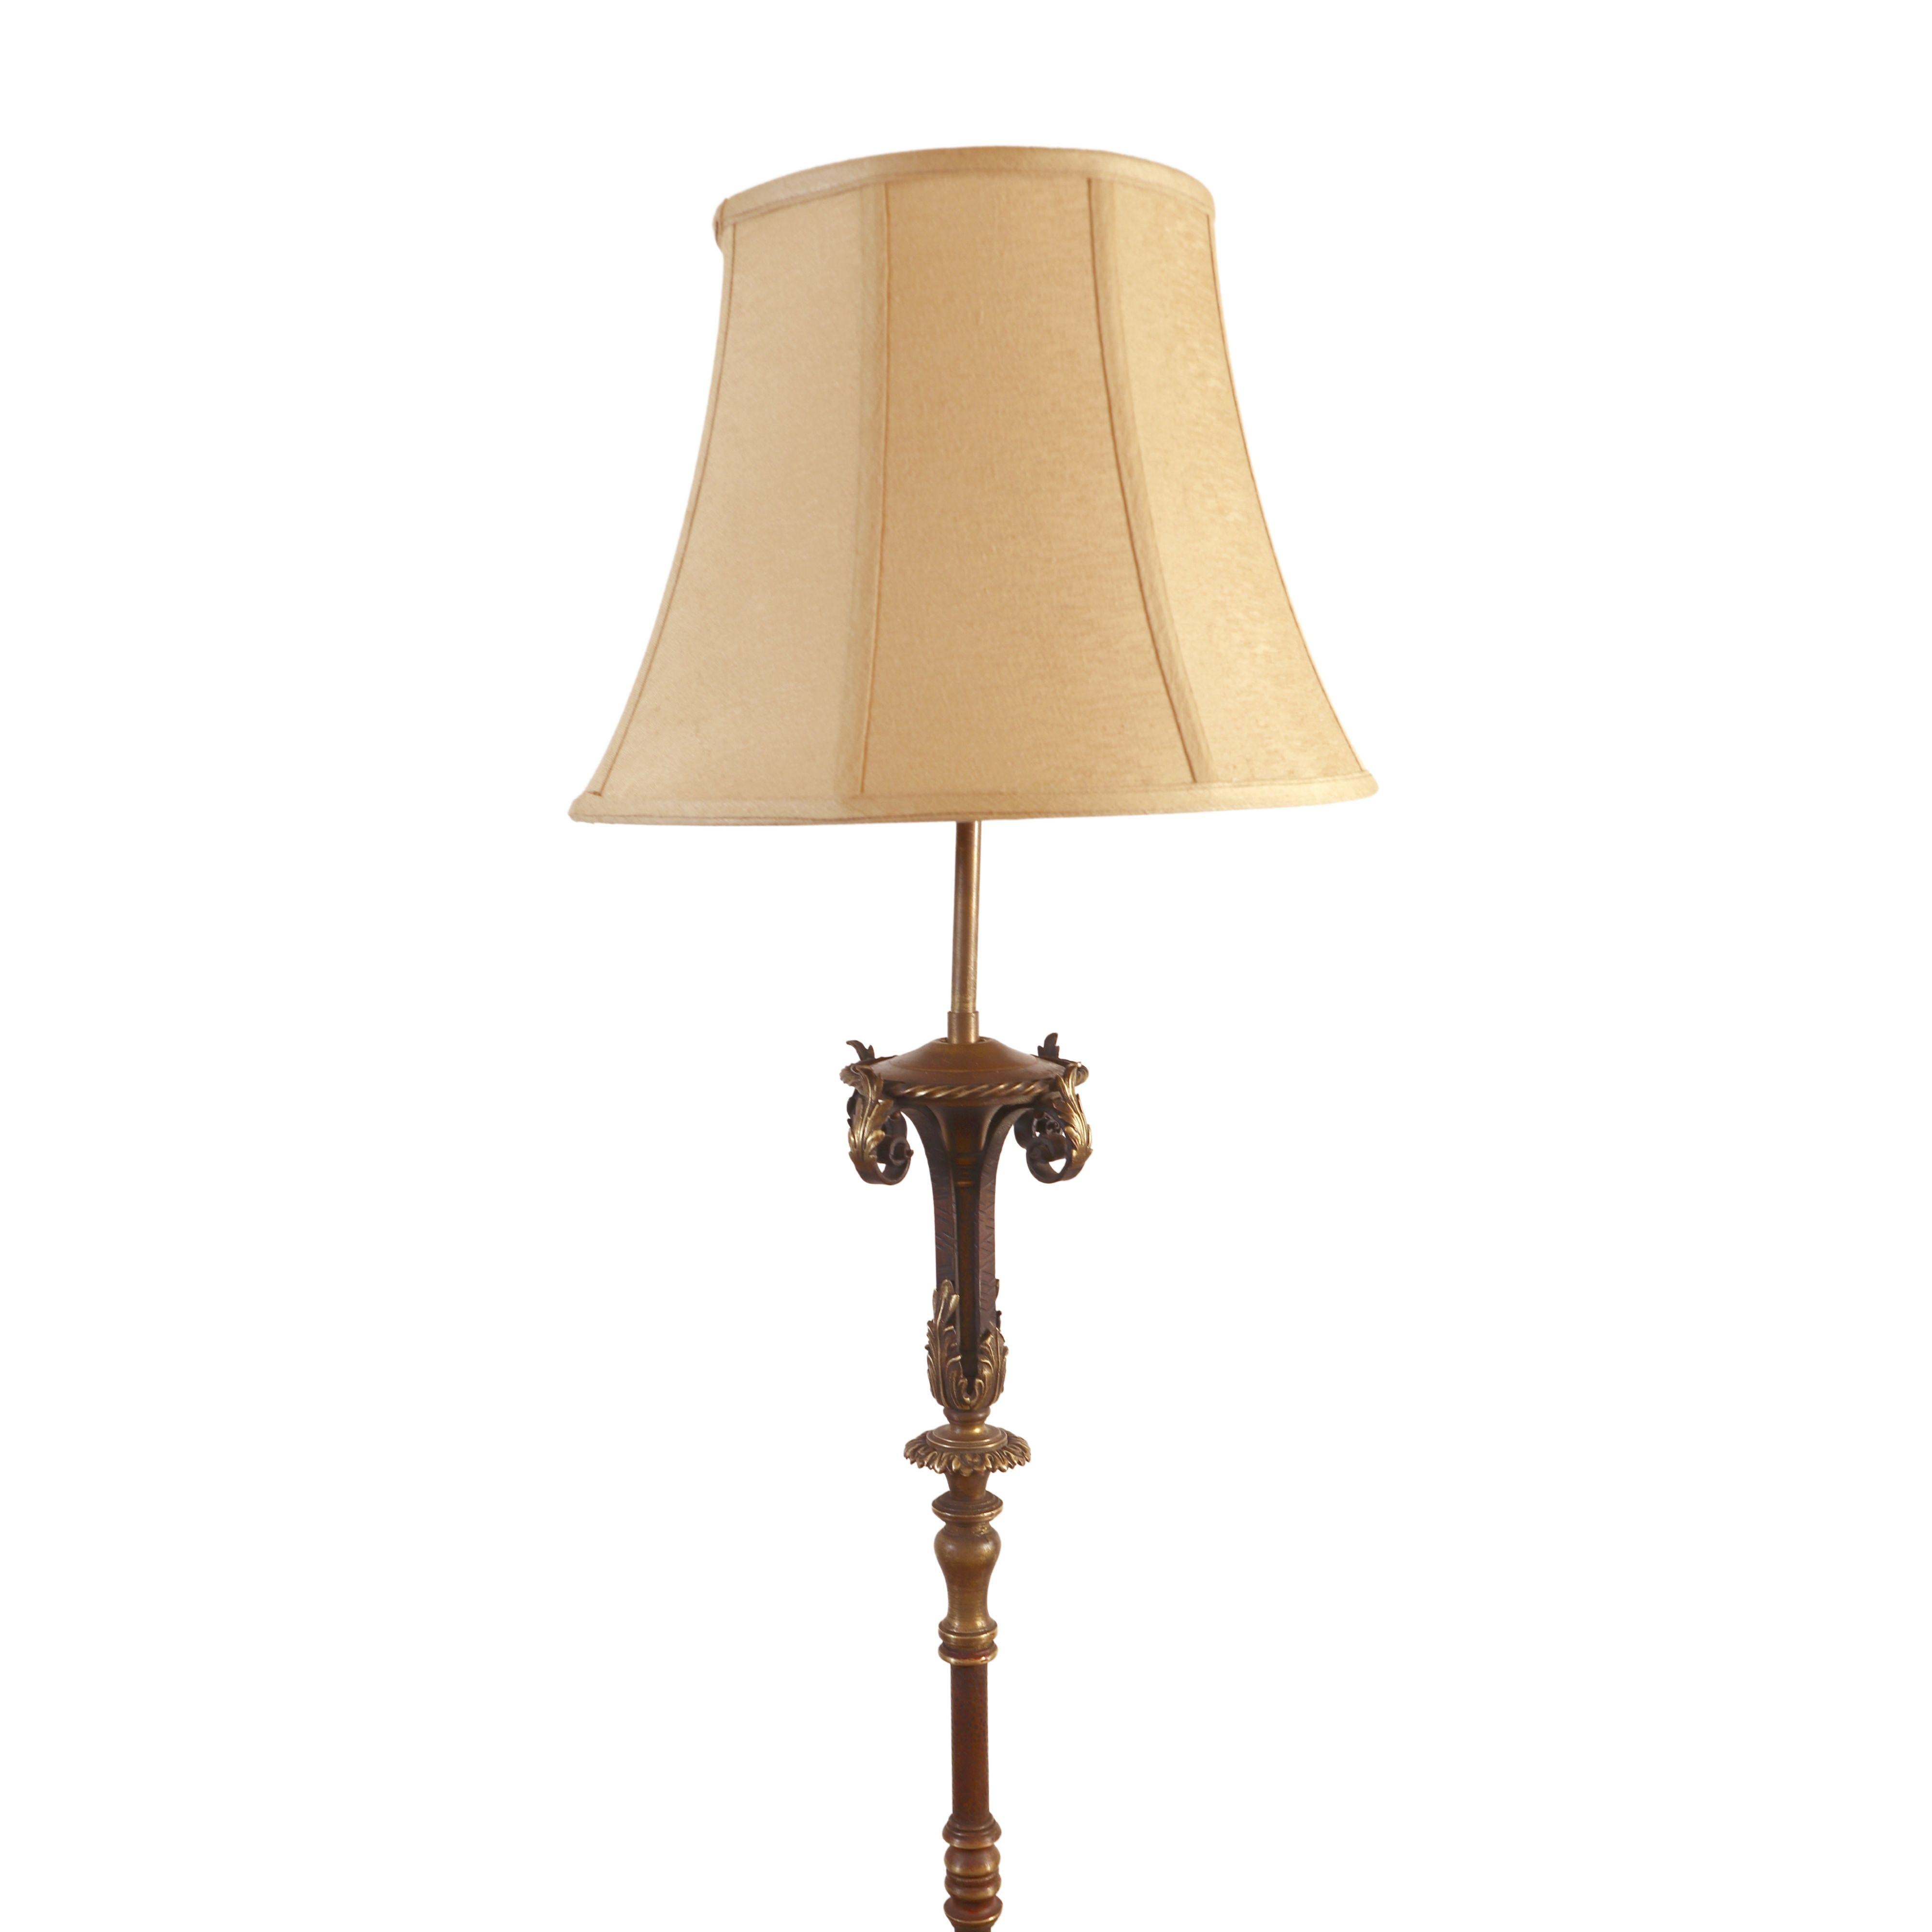 Brass and cast iron floor lamp with a black wrought iron base and beige shade. In good condition with appropriate wear from age. One available. Cleaned and restored. Please note, this item is located in one of our NYC locations.